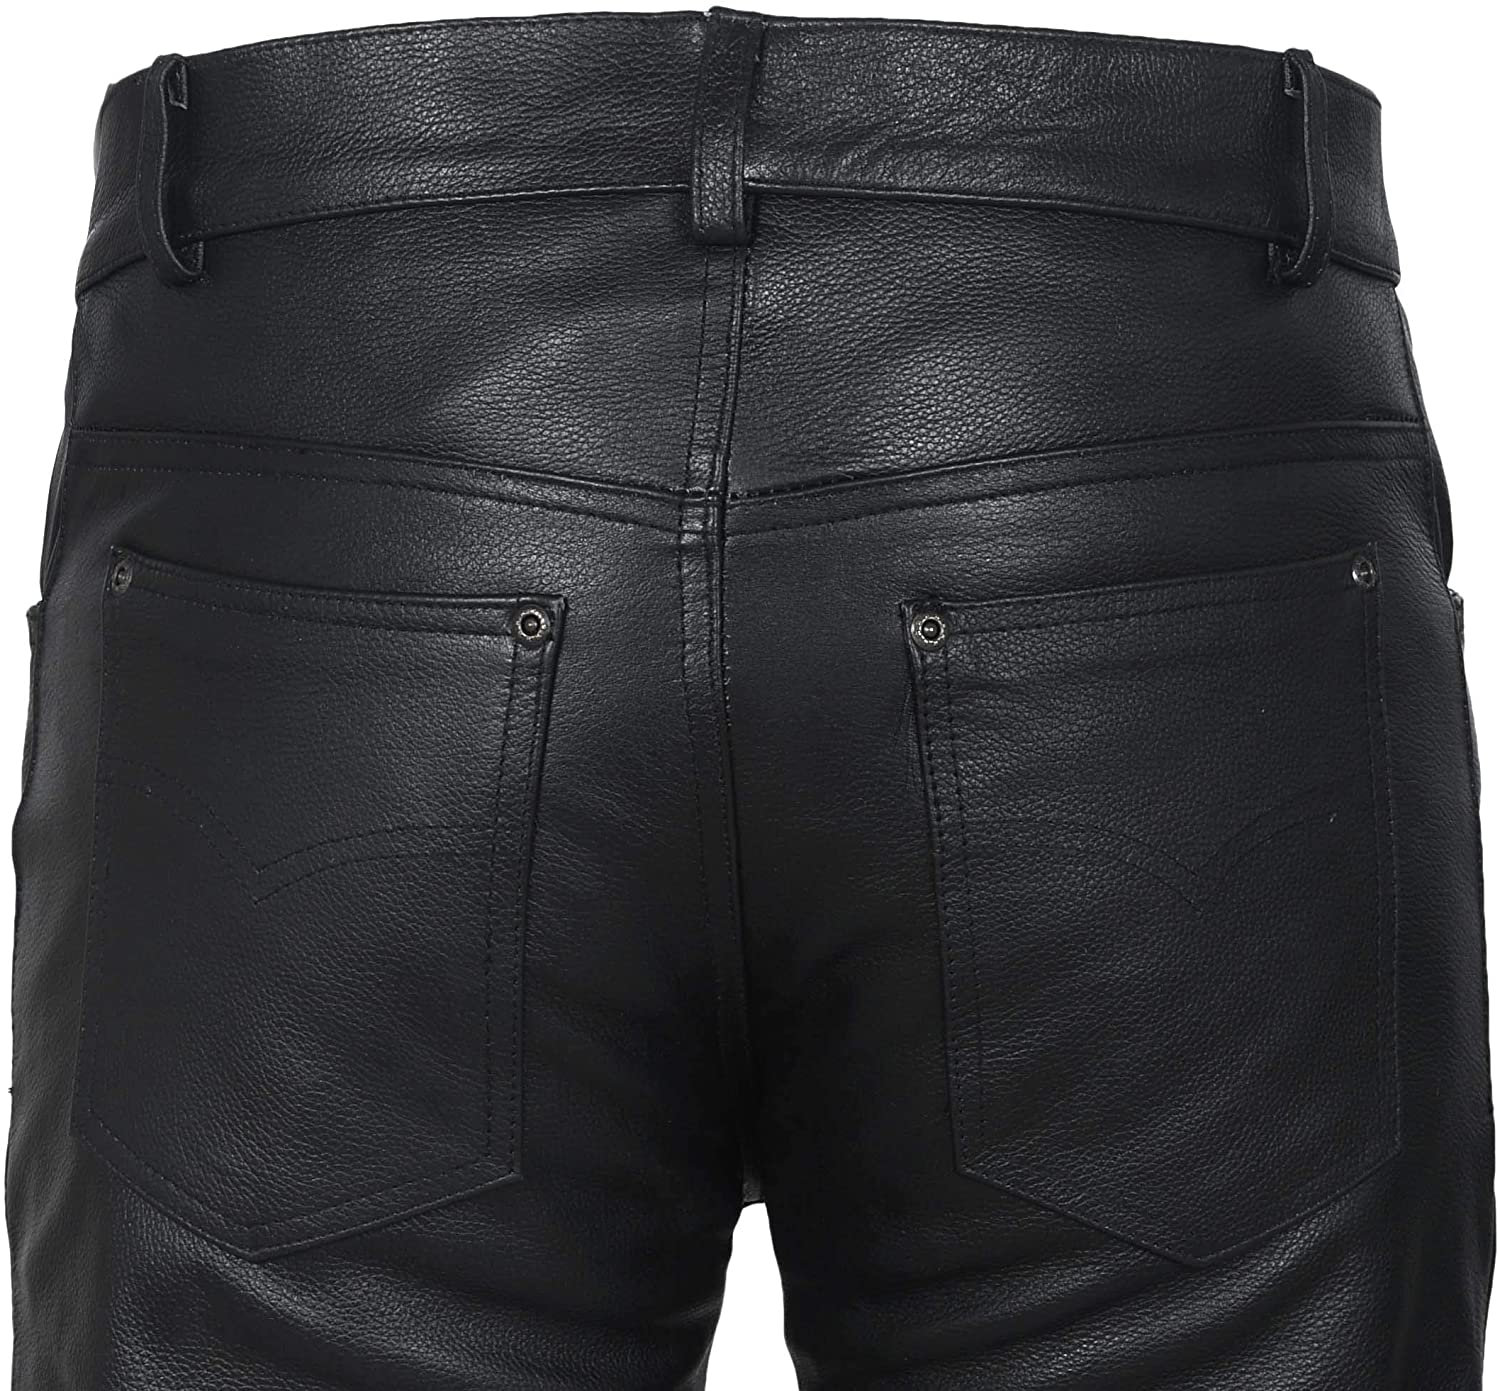 Real Leather Pants for Men Skin Fit Pants Handmade Real - Etsy